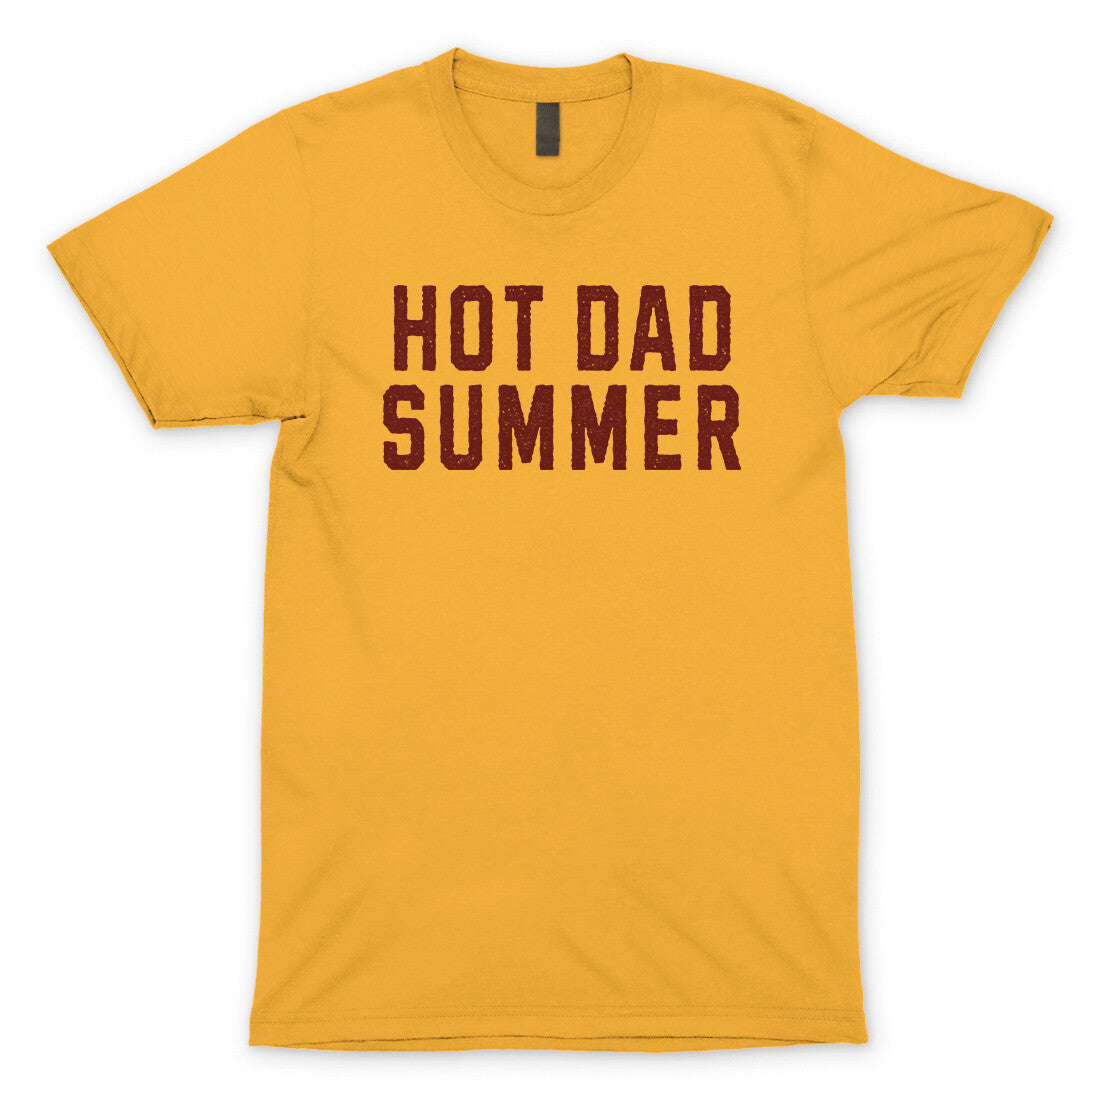 Hot Dad Summer in Gold Color